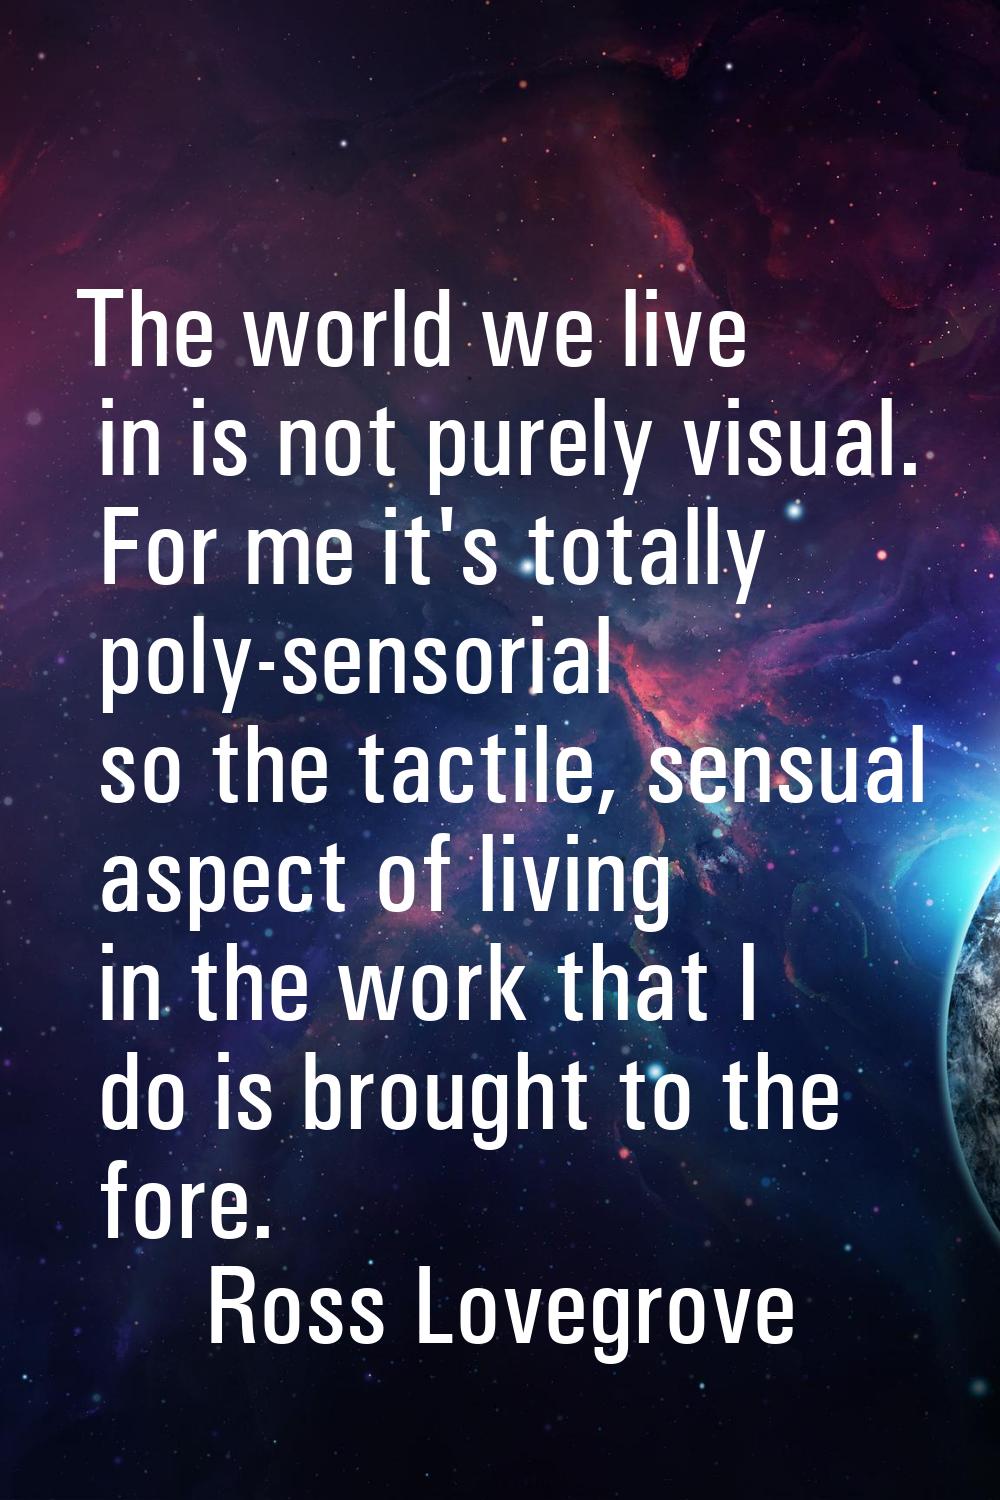 The world we live in is not purely visual. For me it's totally poly-sensorial so the tactile, sensu